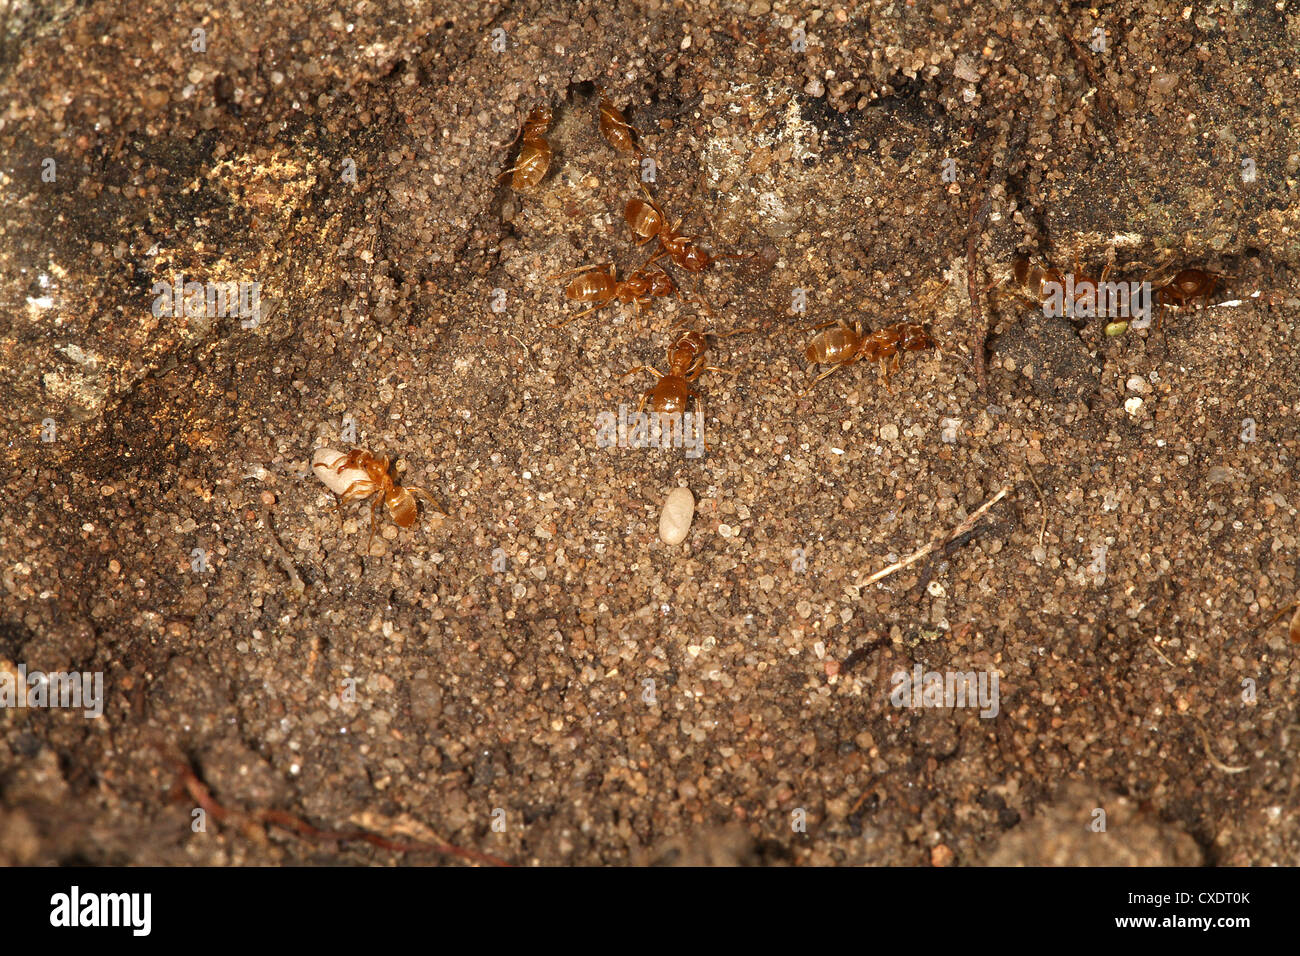 Red ants moving eggs after nest disturbed. Stock Photo